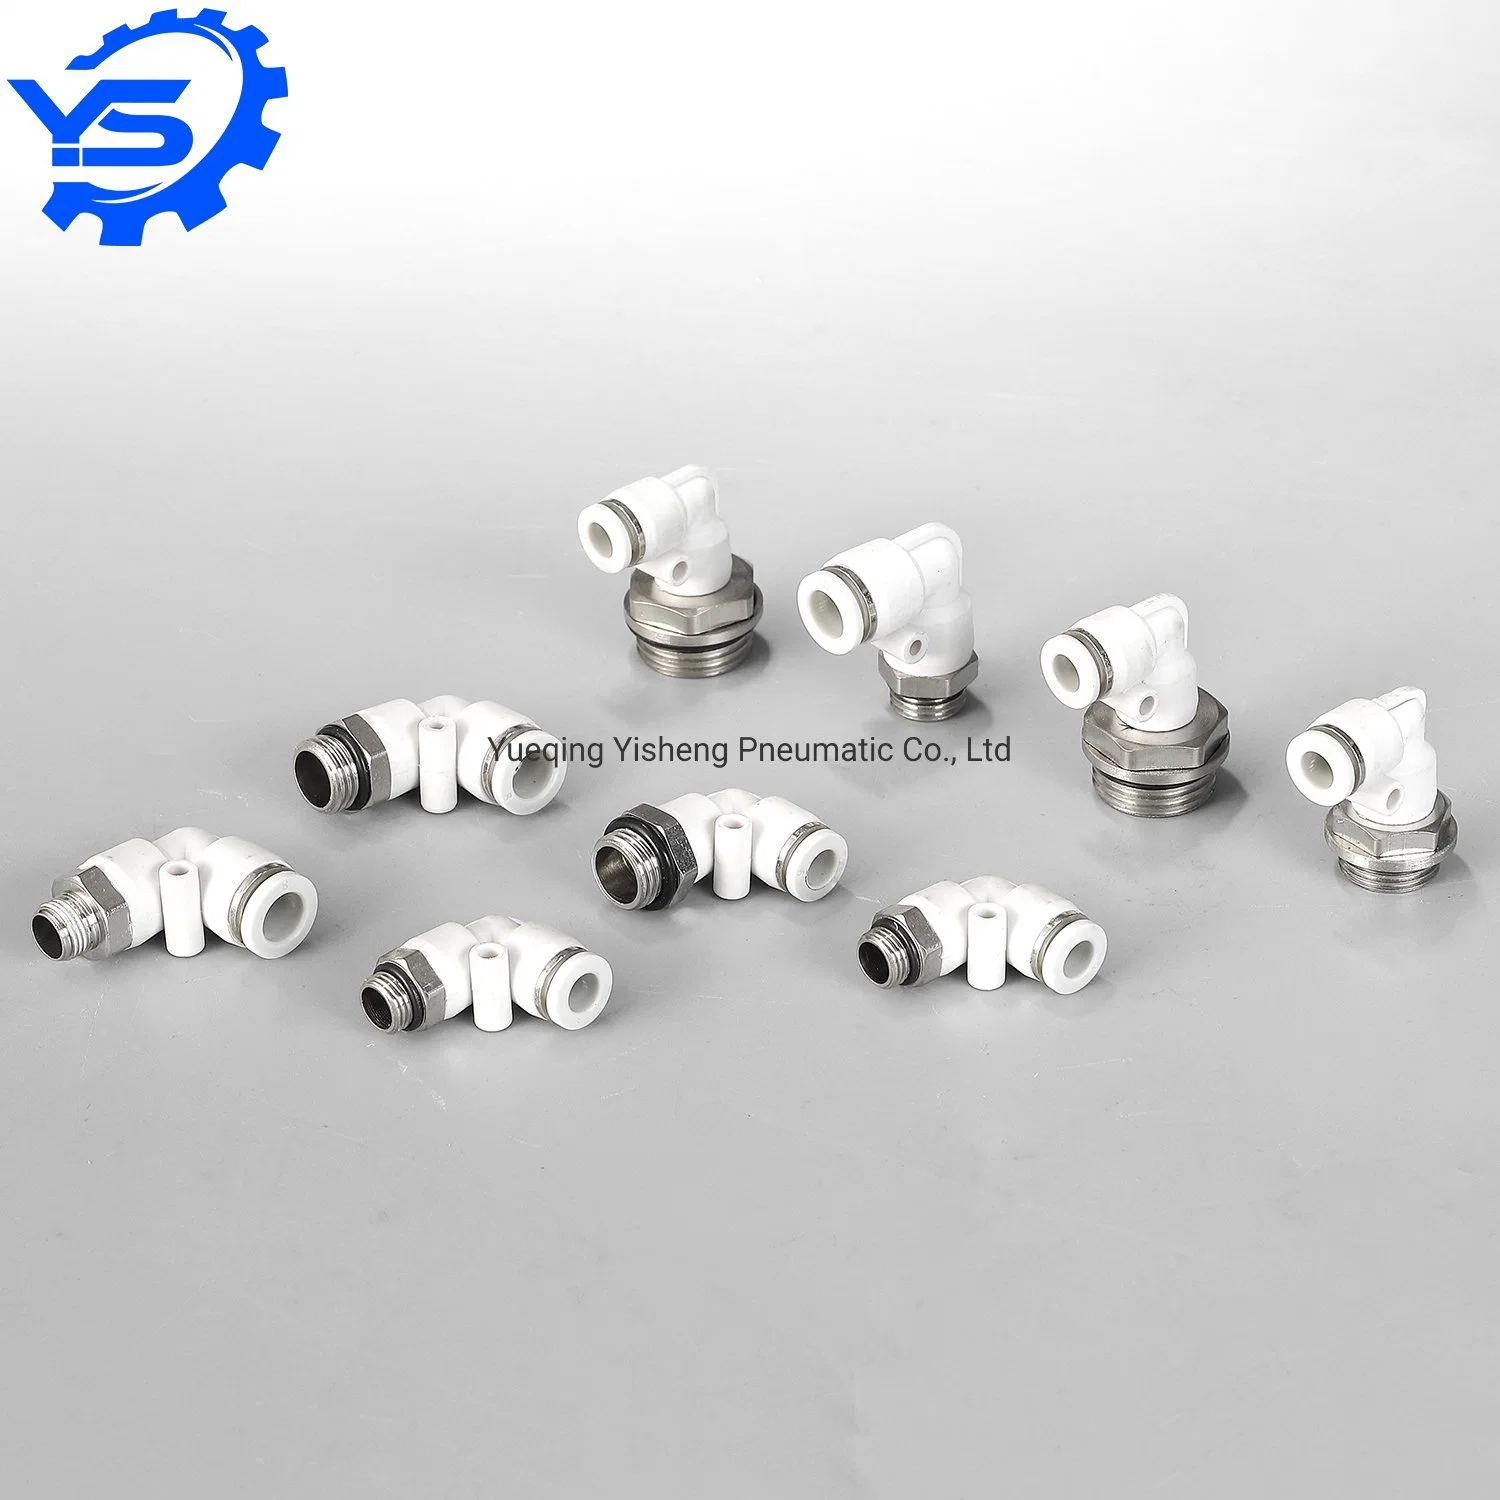 Pl Series White Color NPT 90 Degree Elbow Air Compressor Pneumatic Fittings Rotary Push in Air Fitting